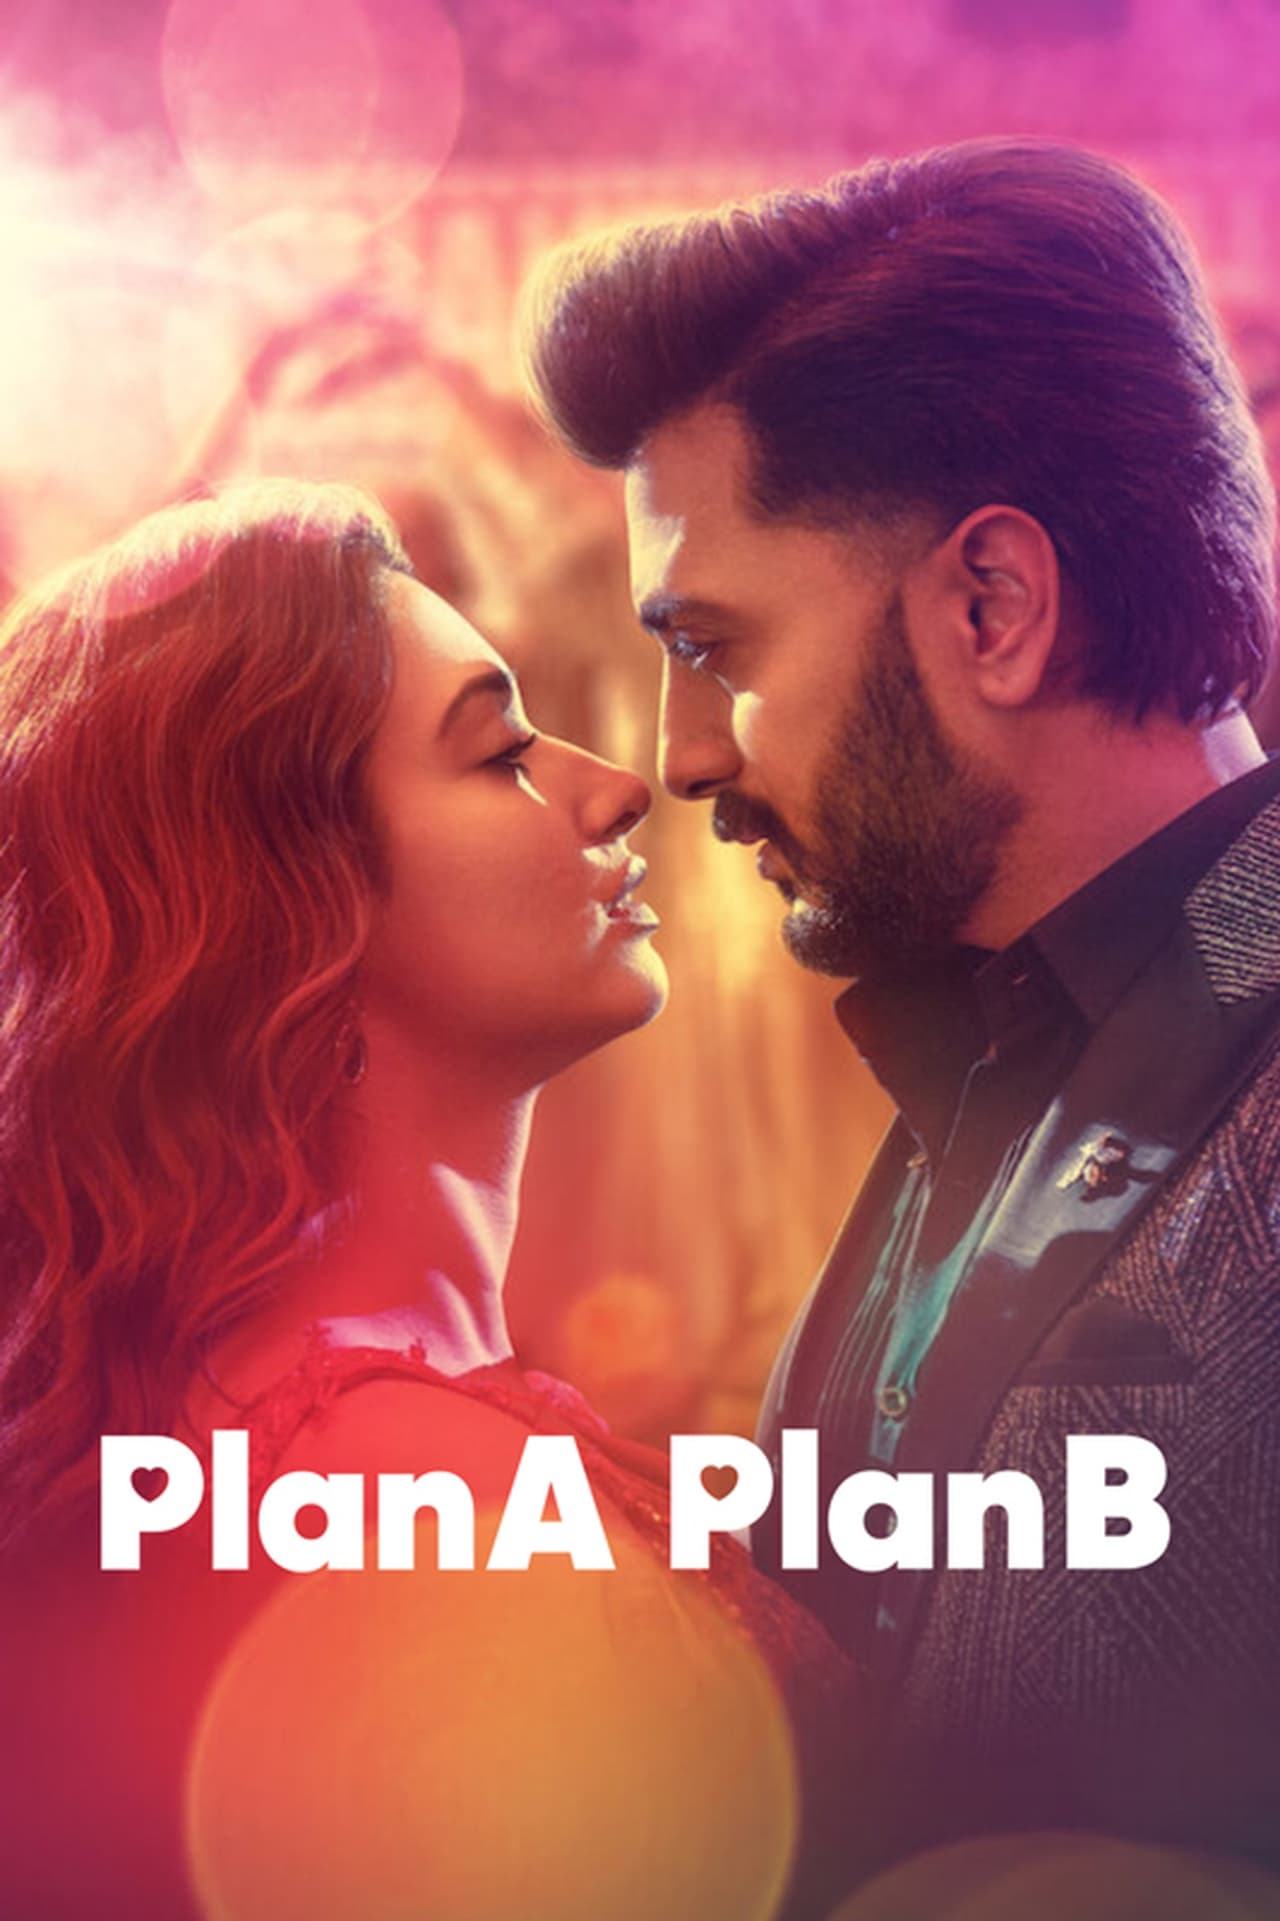 Plan A Plan B Release Date, Star Cast, Story, and more